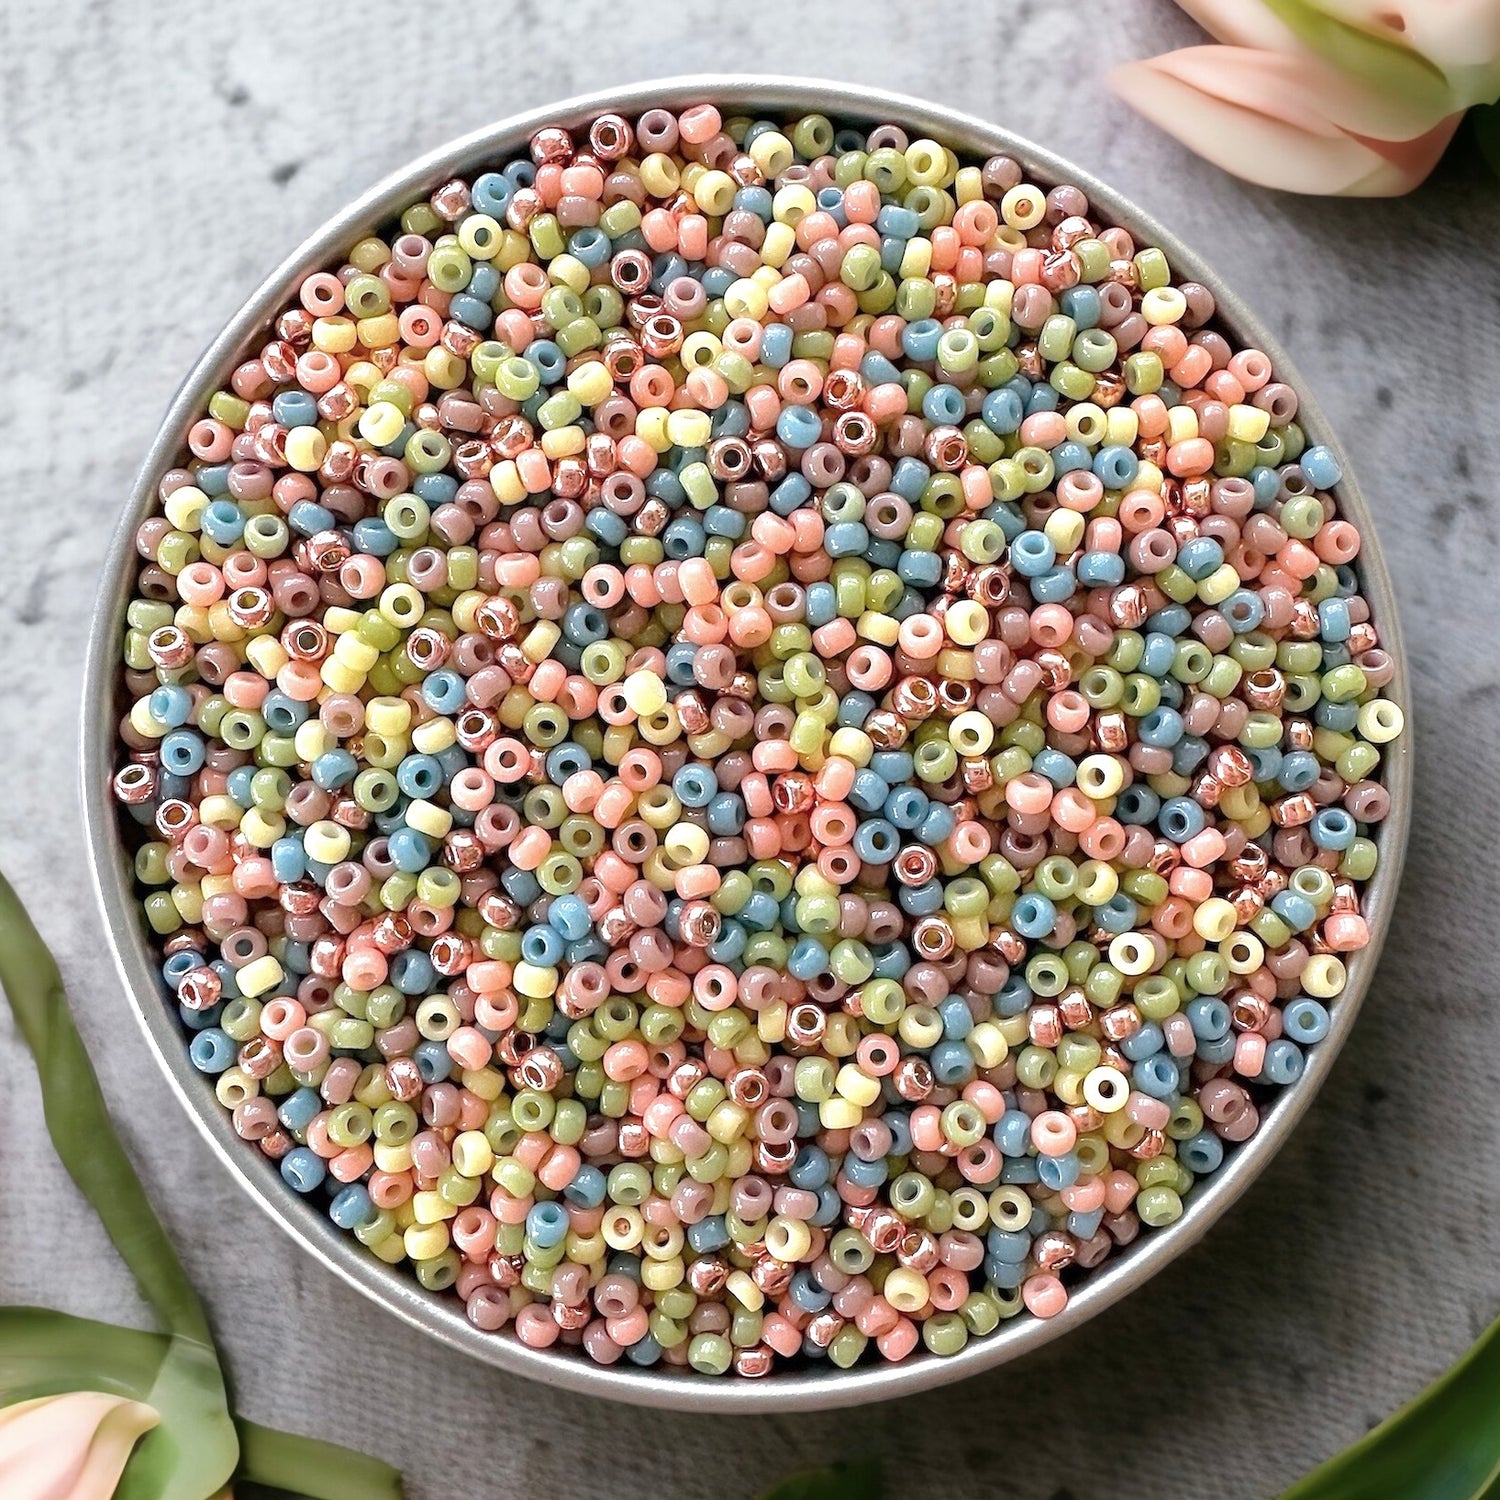 Pastel mix of Miyuki 11/0 seed beads by The Bead featuring pastel shades of peach, yellow, green, blue, and purple in a silver container on a gray concrete surface with peach tulips.